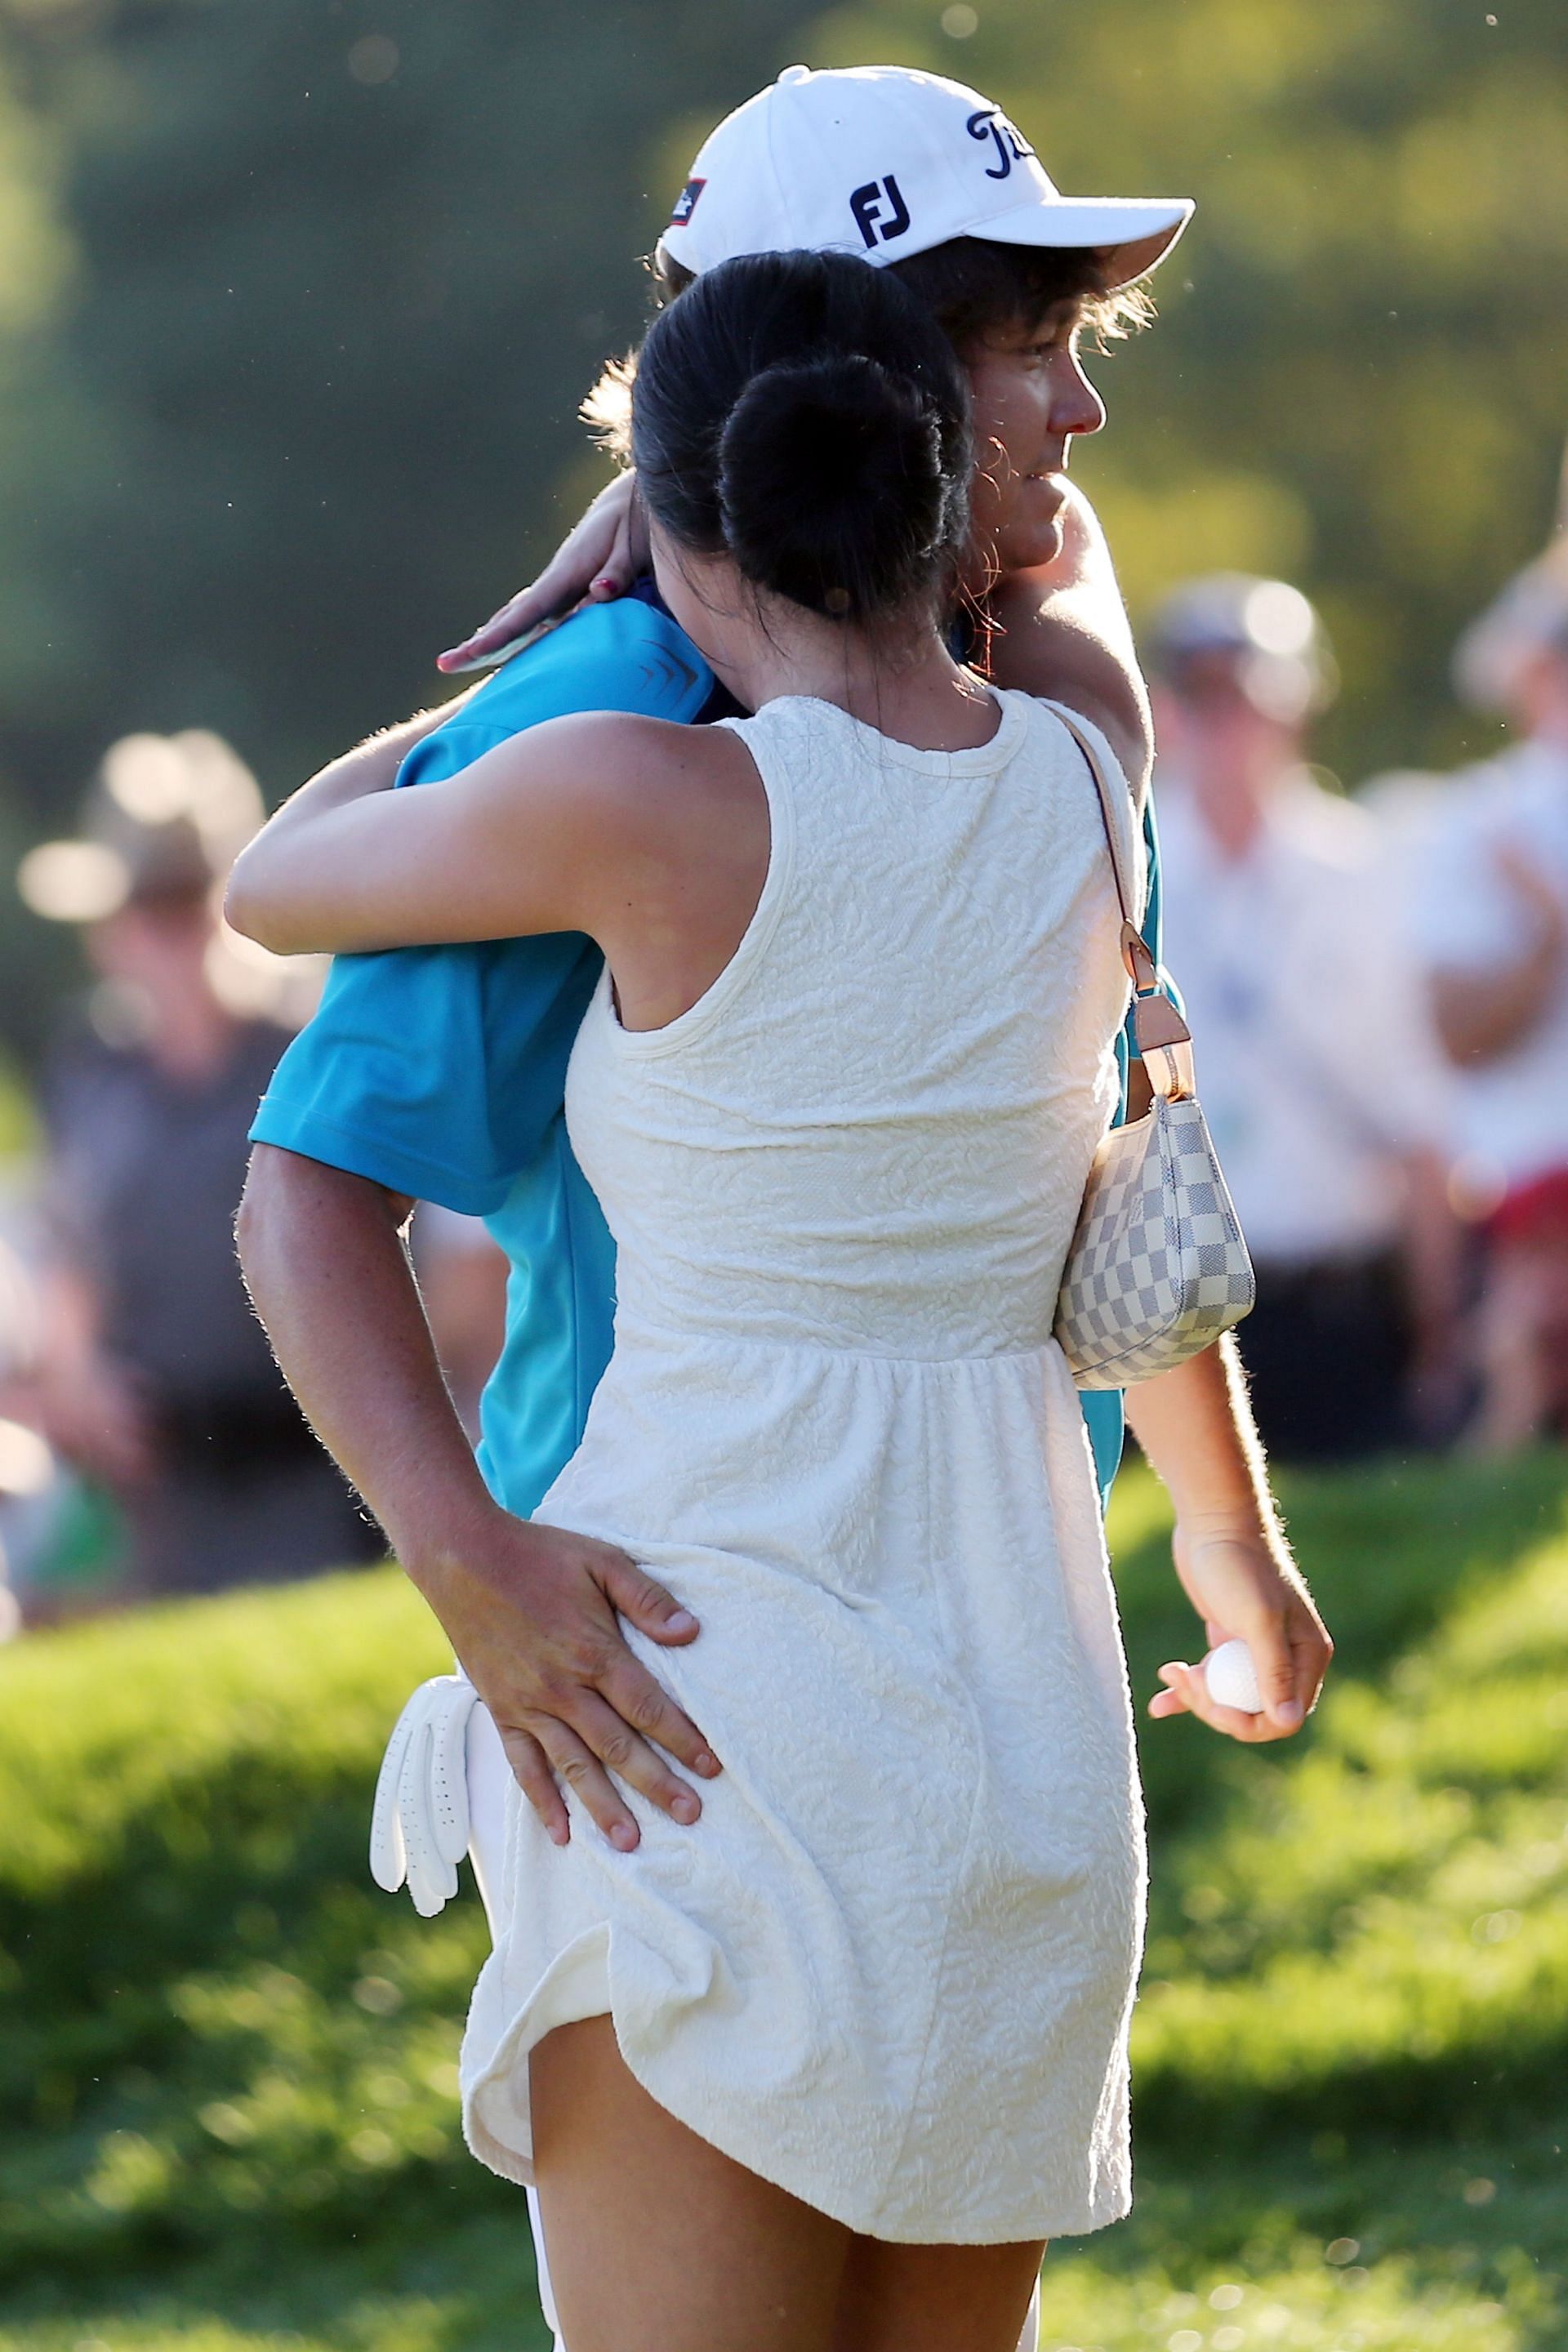 Jason Dufner hugs his wife, Amanda Boyd, after winning the 2013 PGA Championship (via Getty Images)